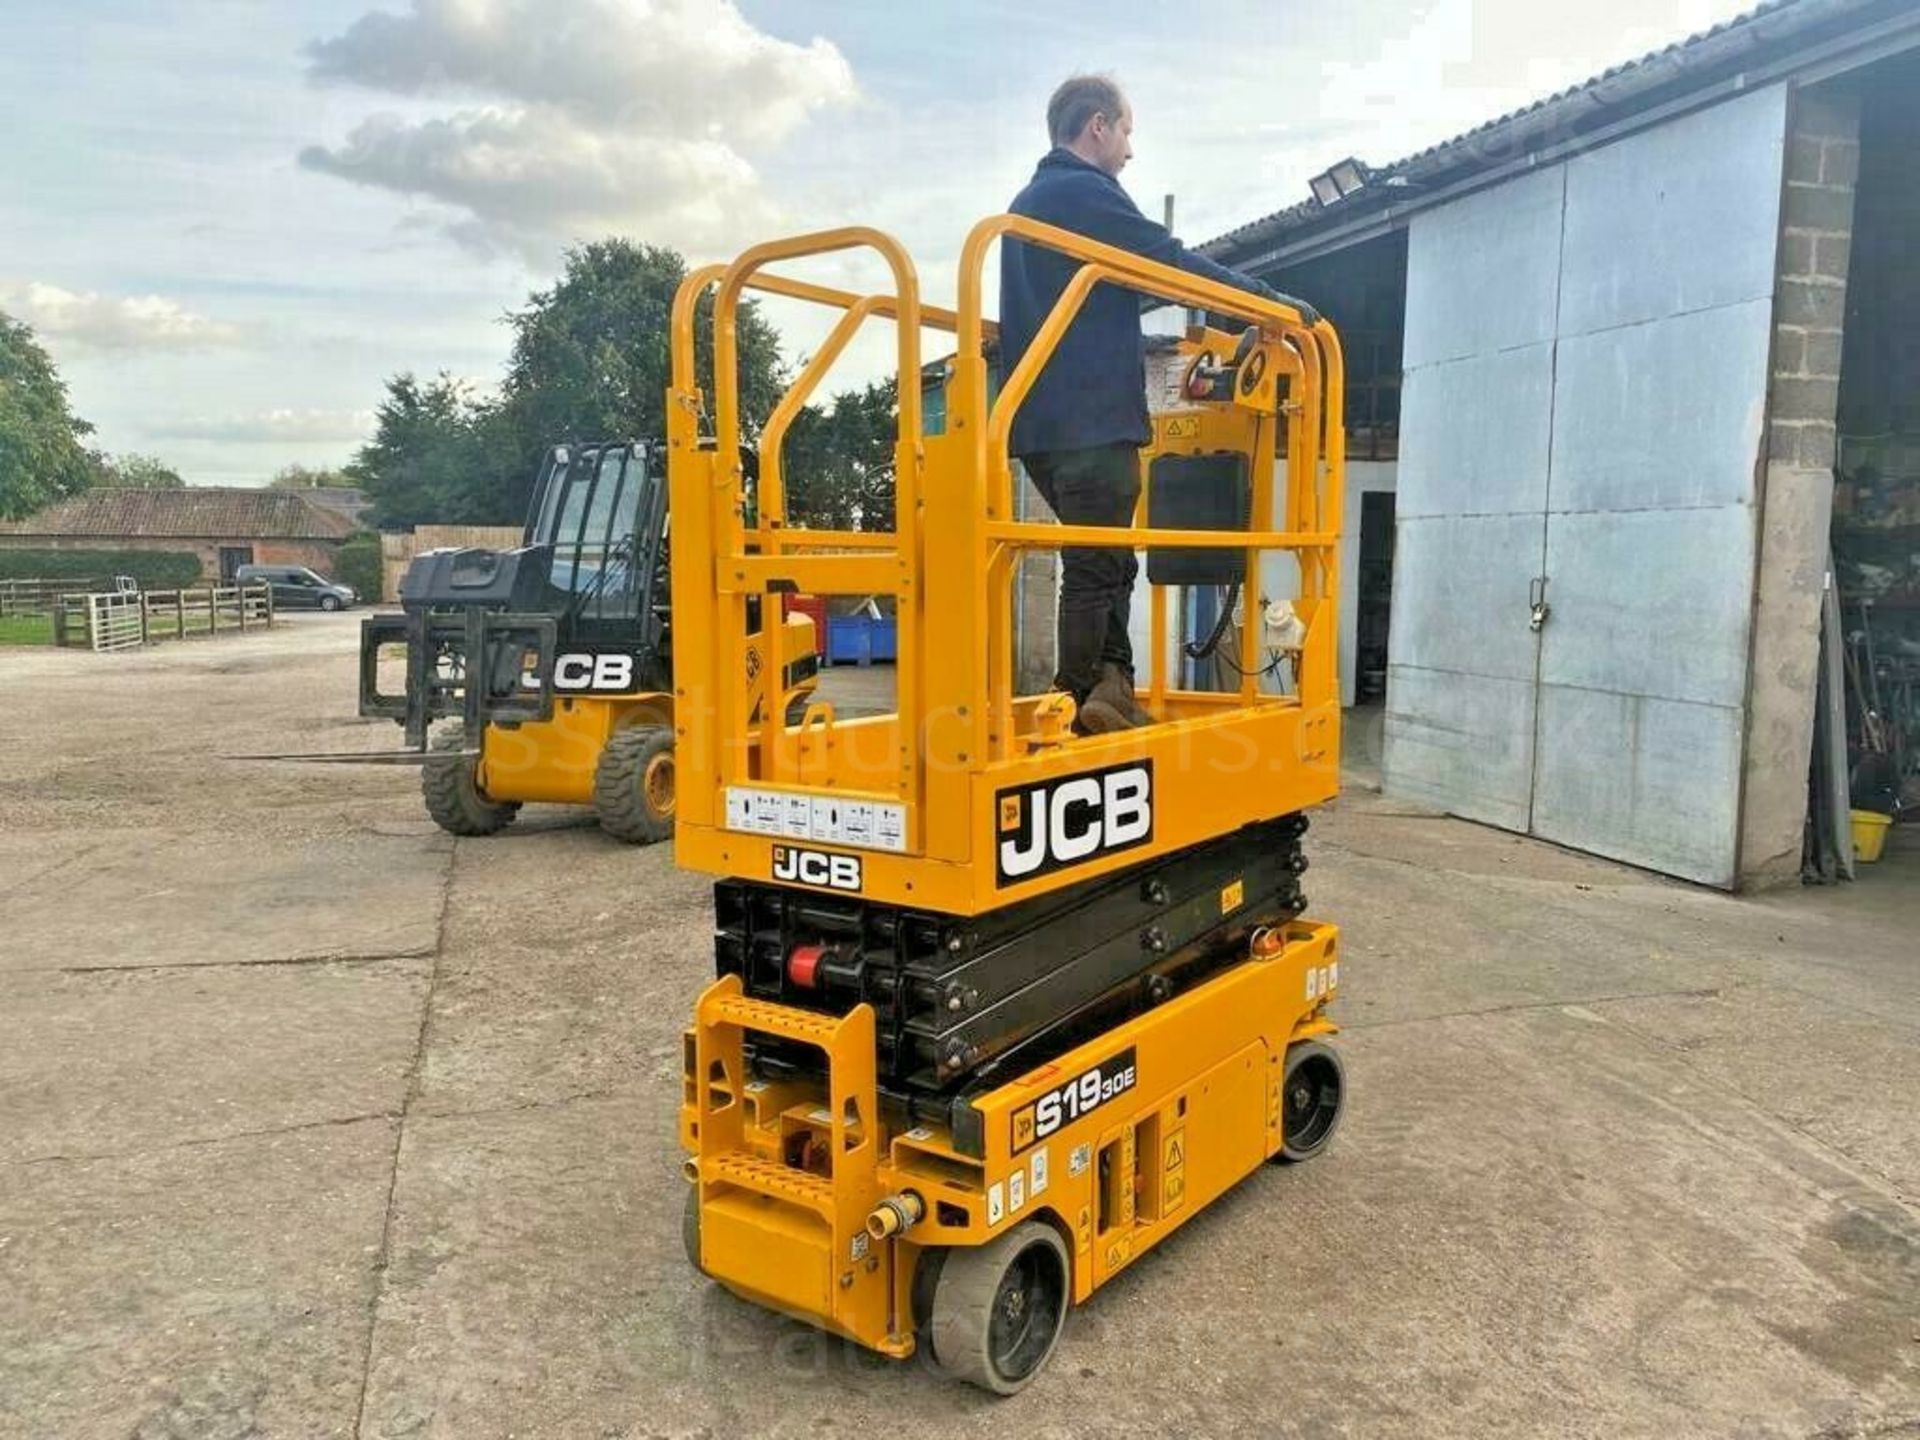 SCISSOR LIFT JCB S1930E ELECTRIC, PLATFORM HEIGHT 5.8m/ 19ft, ONLY 98.4 HOURS, YEAR 2018 *PLUS VAT* - Image 4 of 14